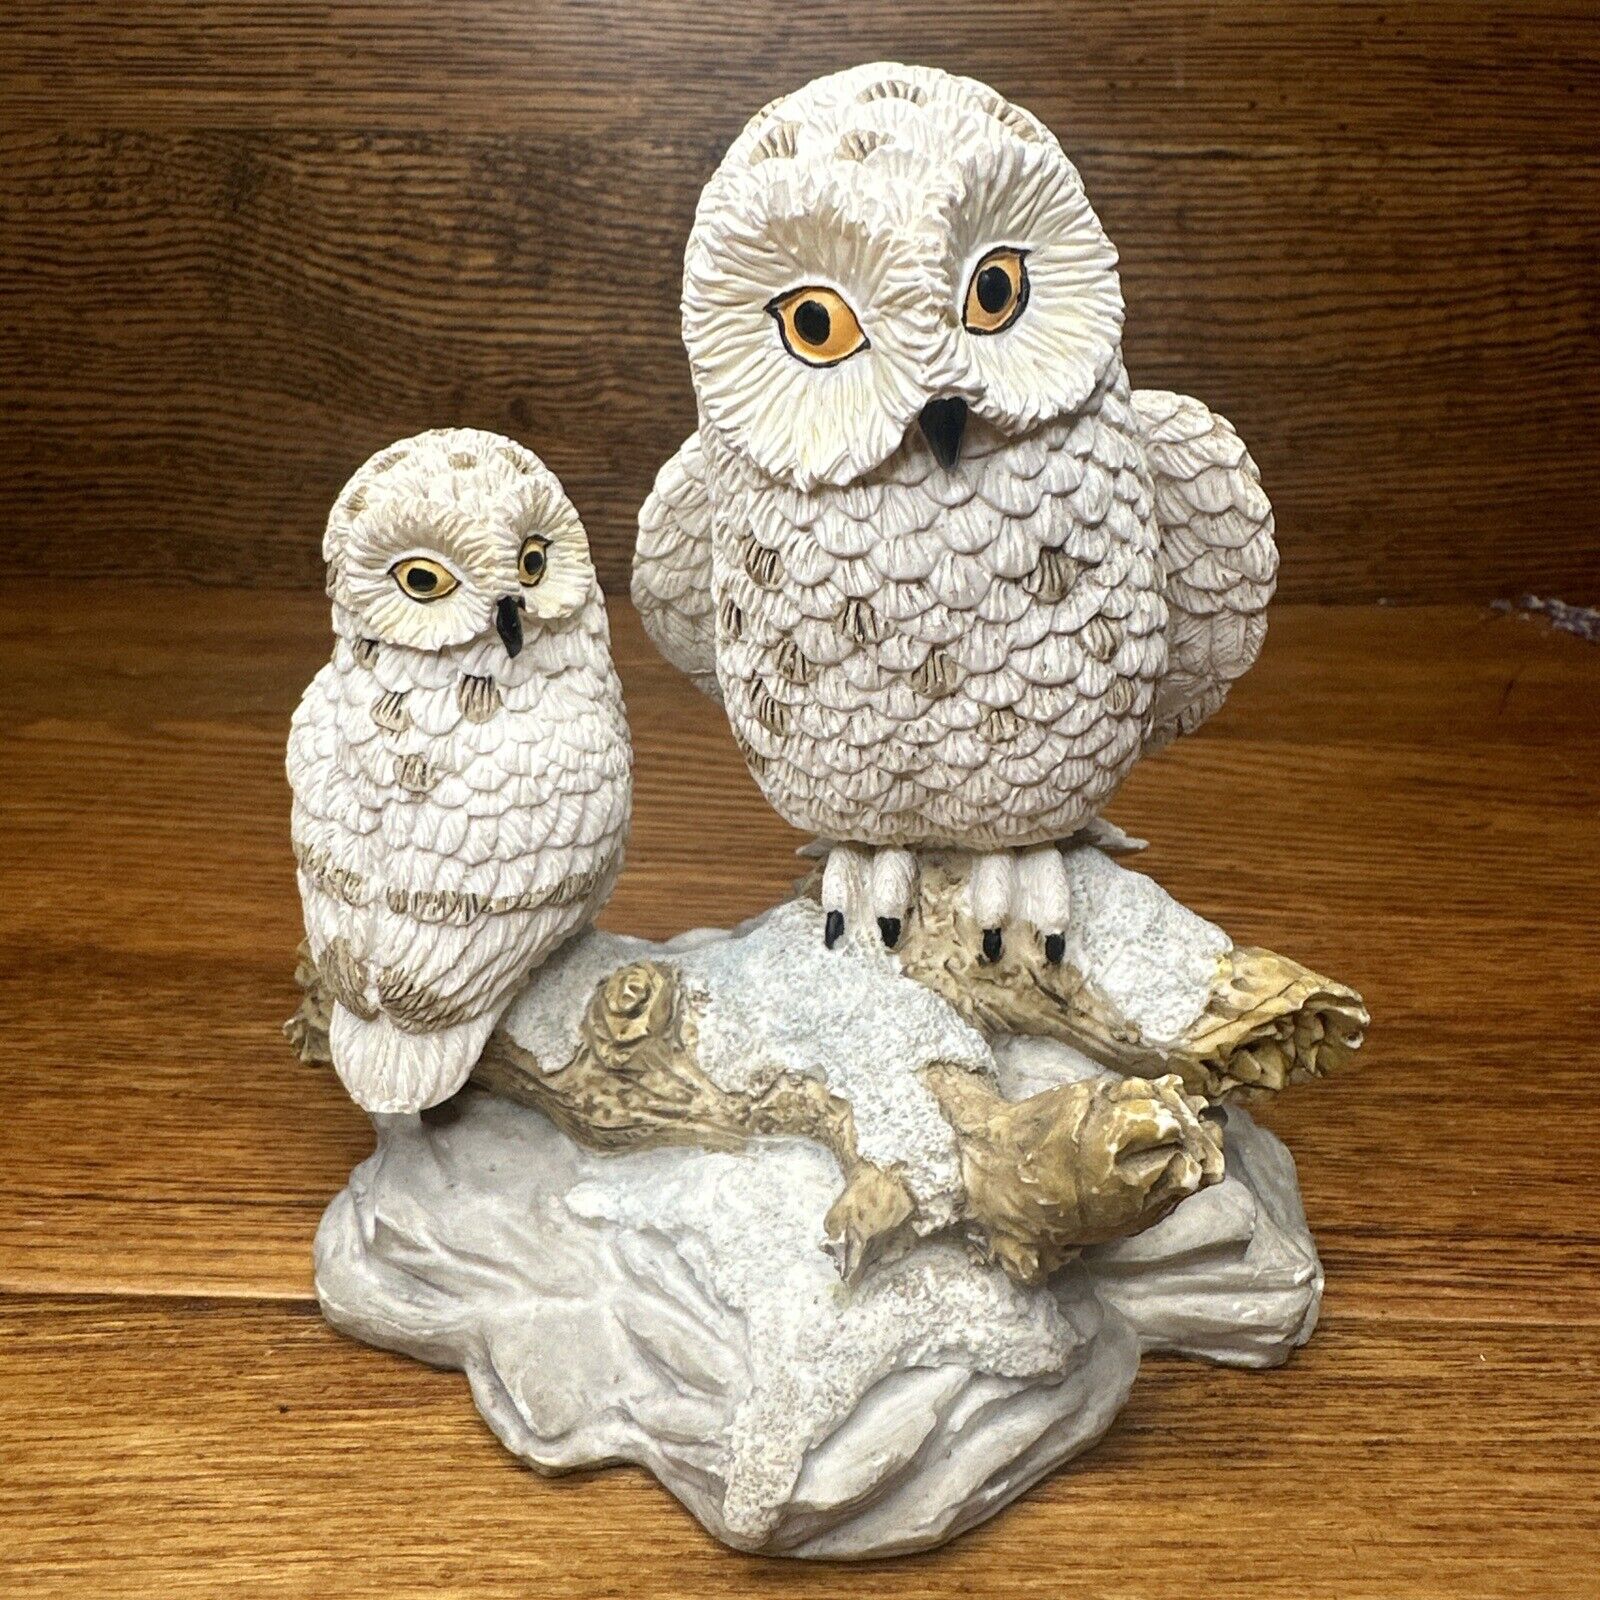 Vintage Herco Owl Figurine Snowy Mom and Baby